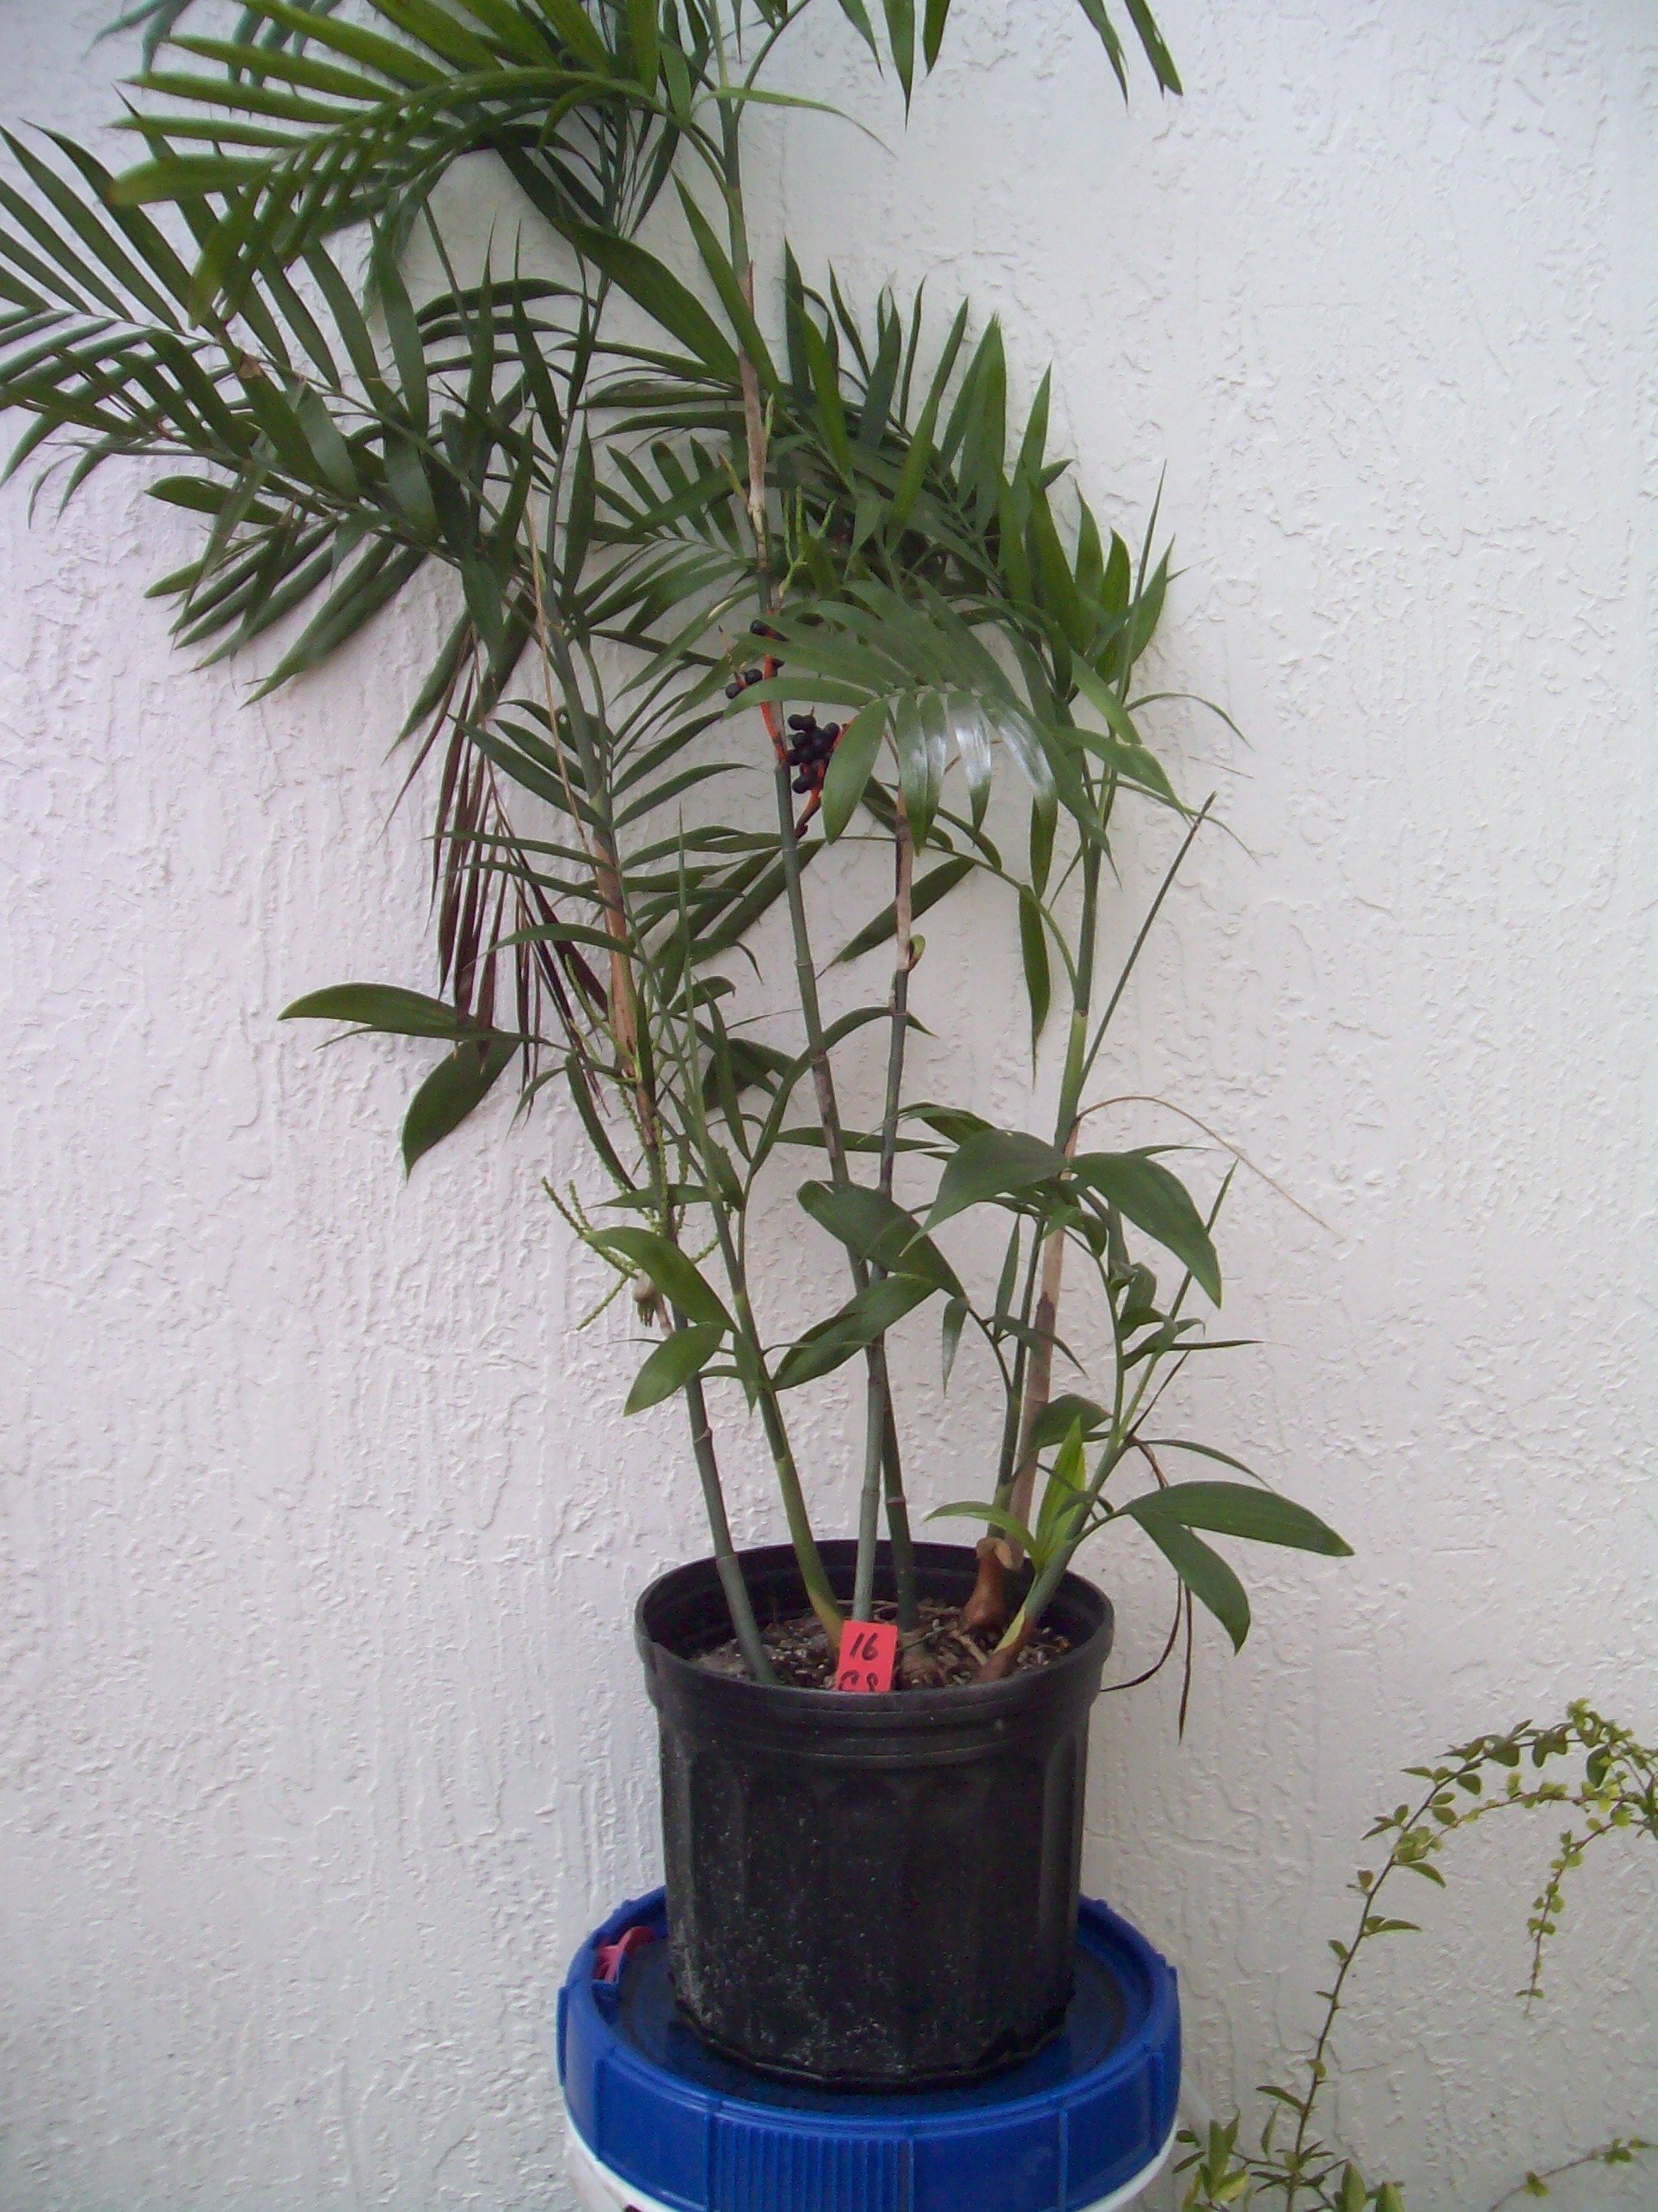 16 Bamboo Palm Tree with Several shoots